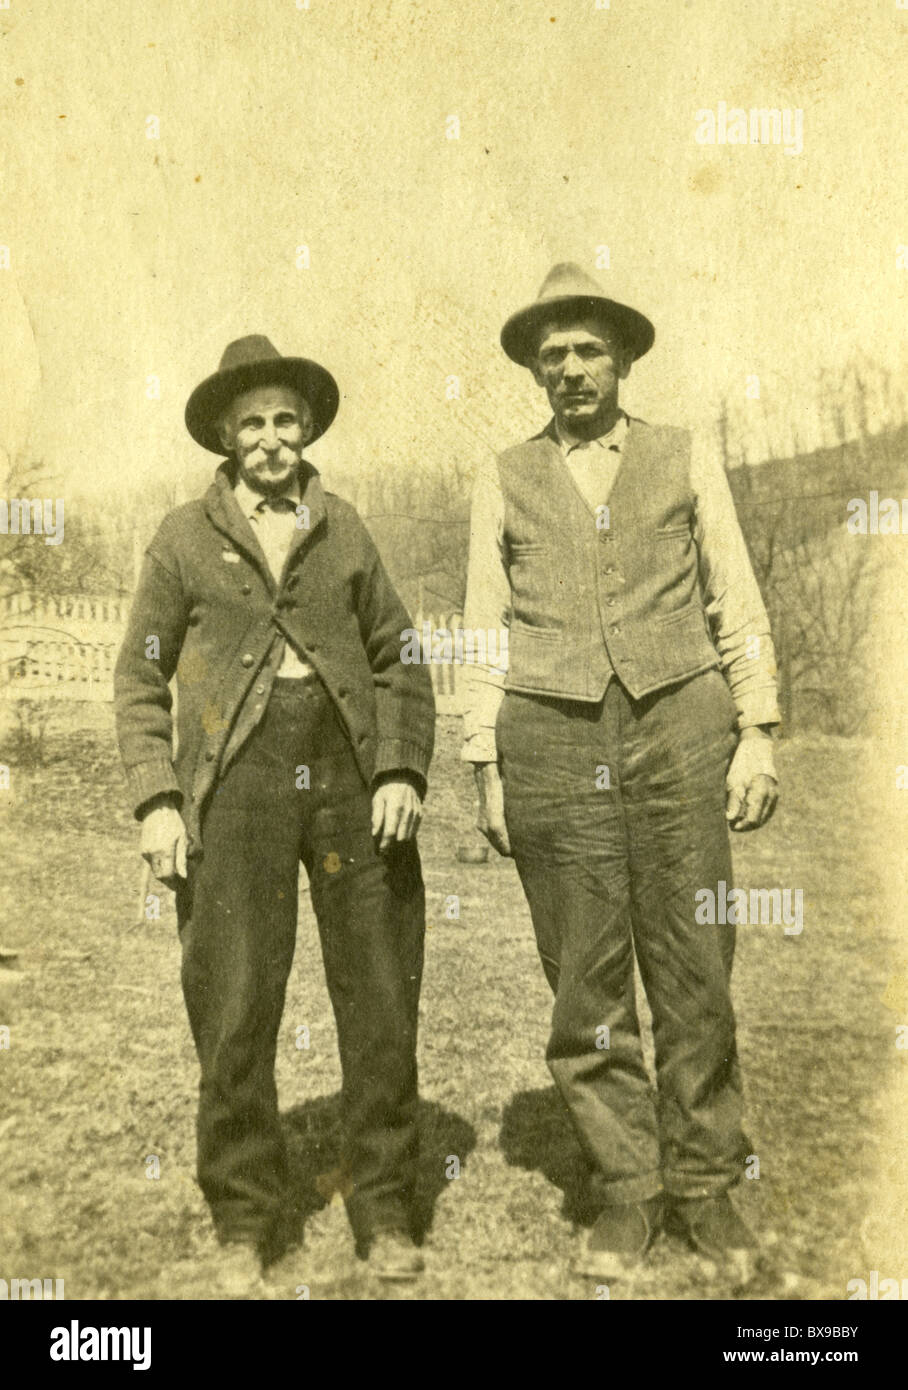 Father and son on the farm in rural america during the 1920s 1930s Americana black and white Stock Photo